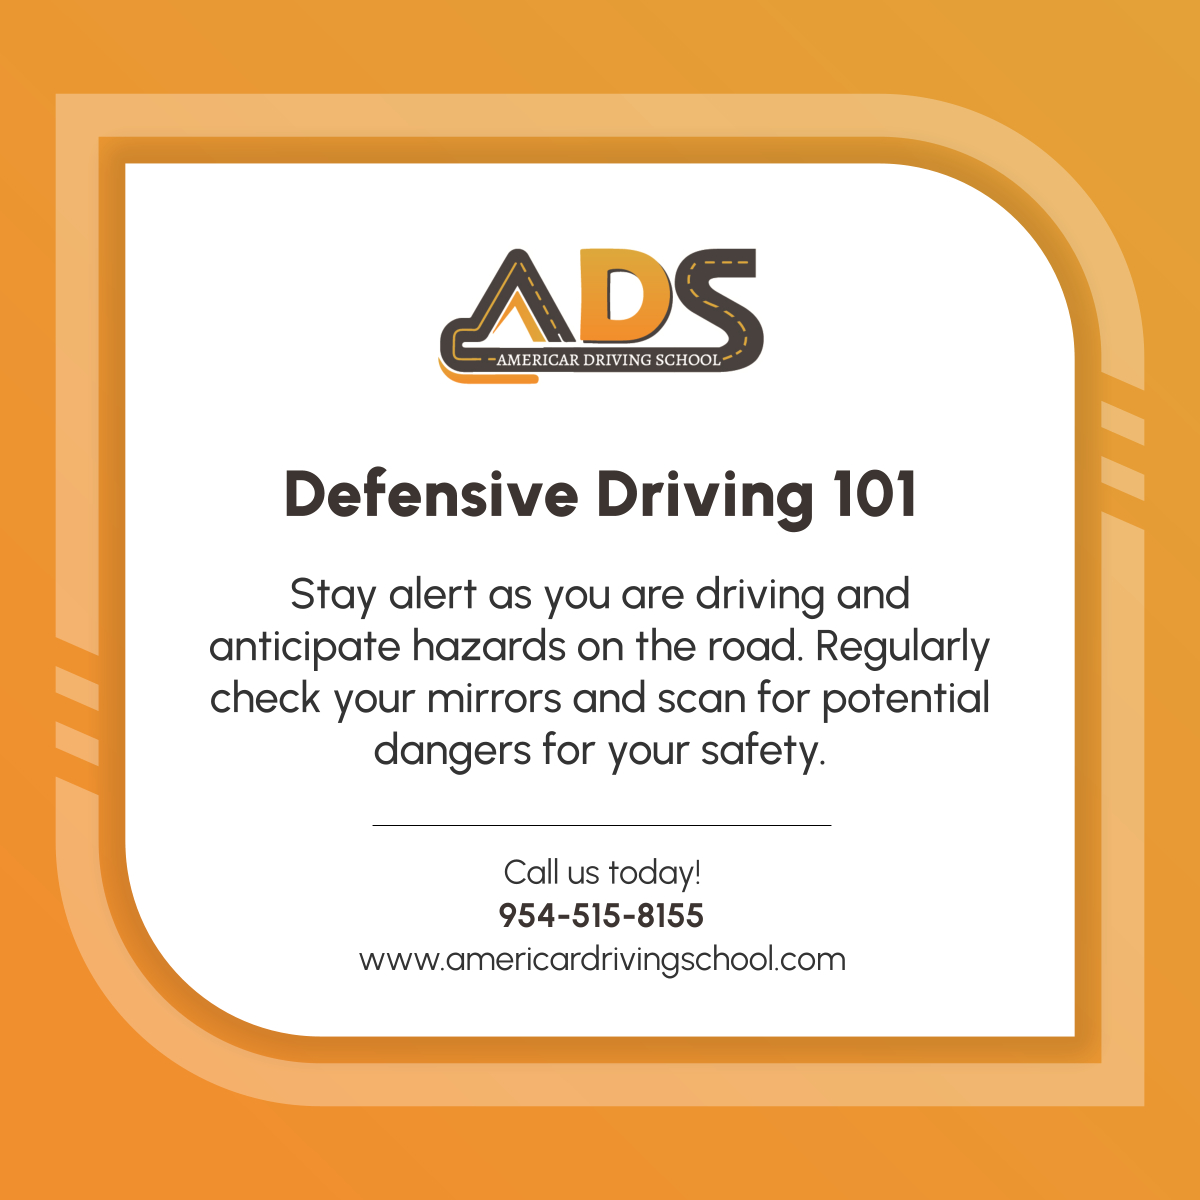 Learn the essentials of defensive driving to stay safe on the road. Stay alert and scan your surroundings! 

#DefensiveDriving #OaklandParkFL #DrivingSchool